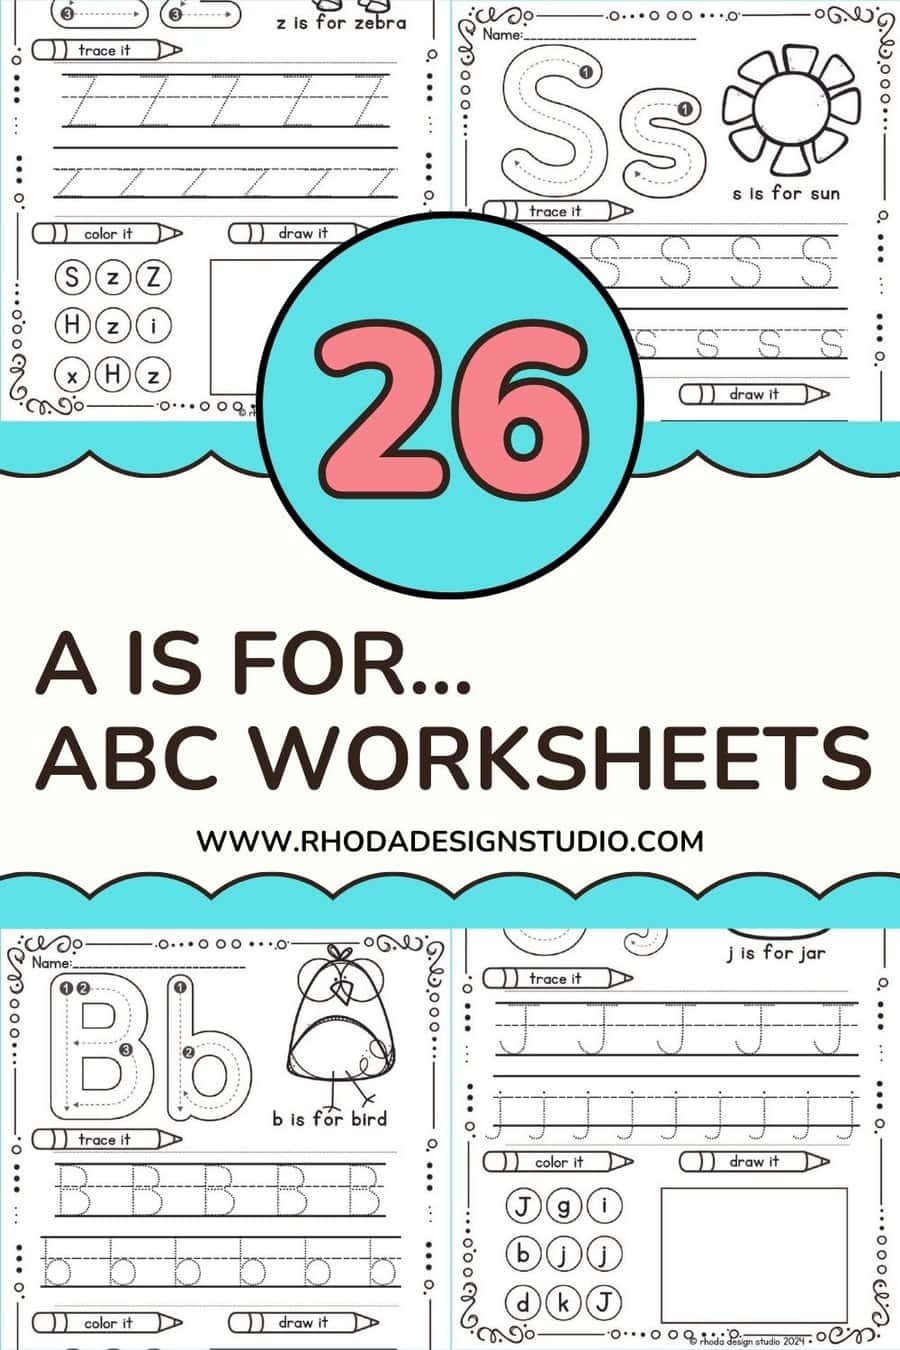 A is For: ABC Worksheets for Free